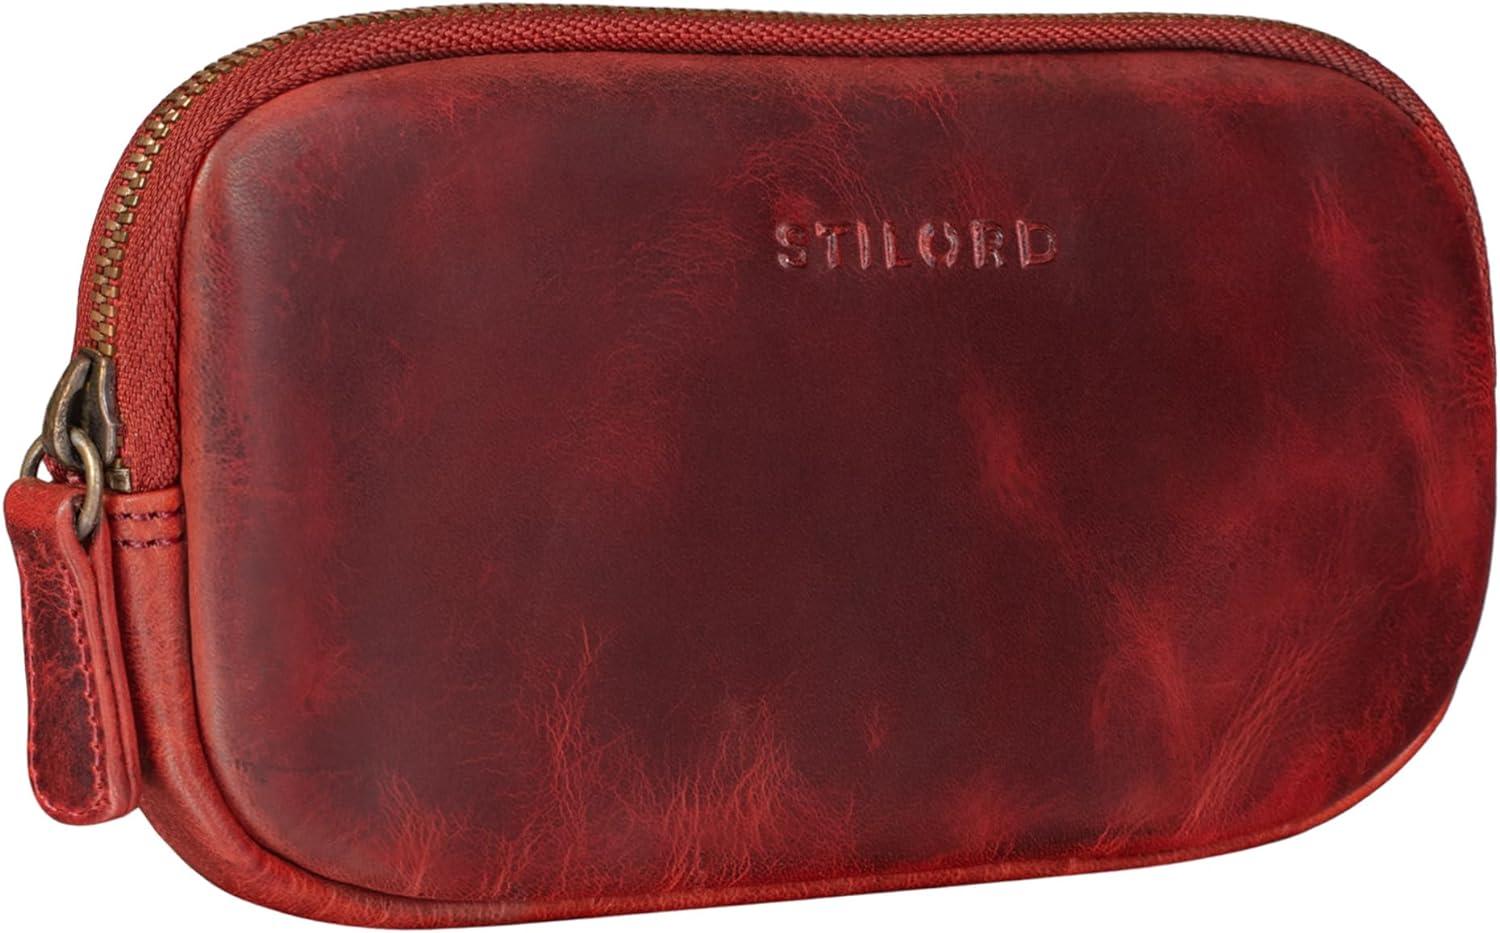 stilord mike small leather pouch vintage for men women ideal as pencil case cosmetic bag coin purse key case